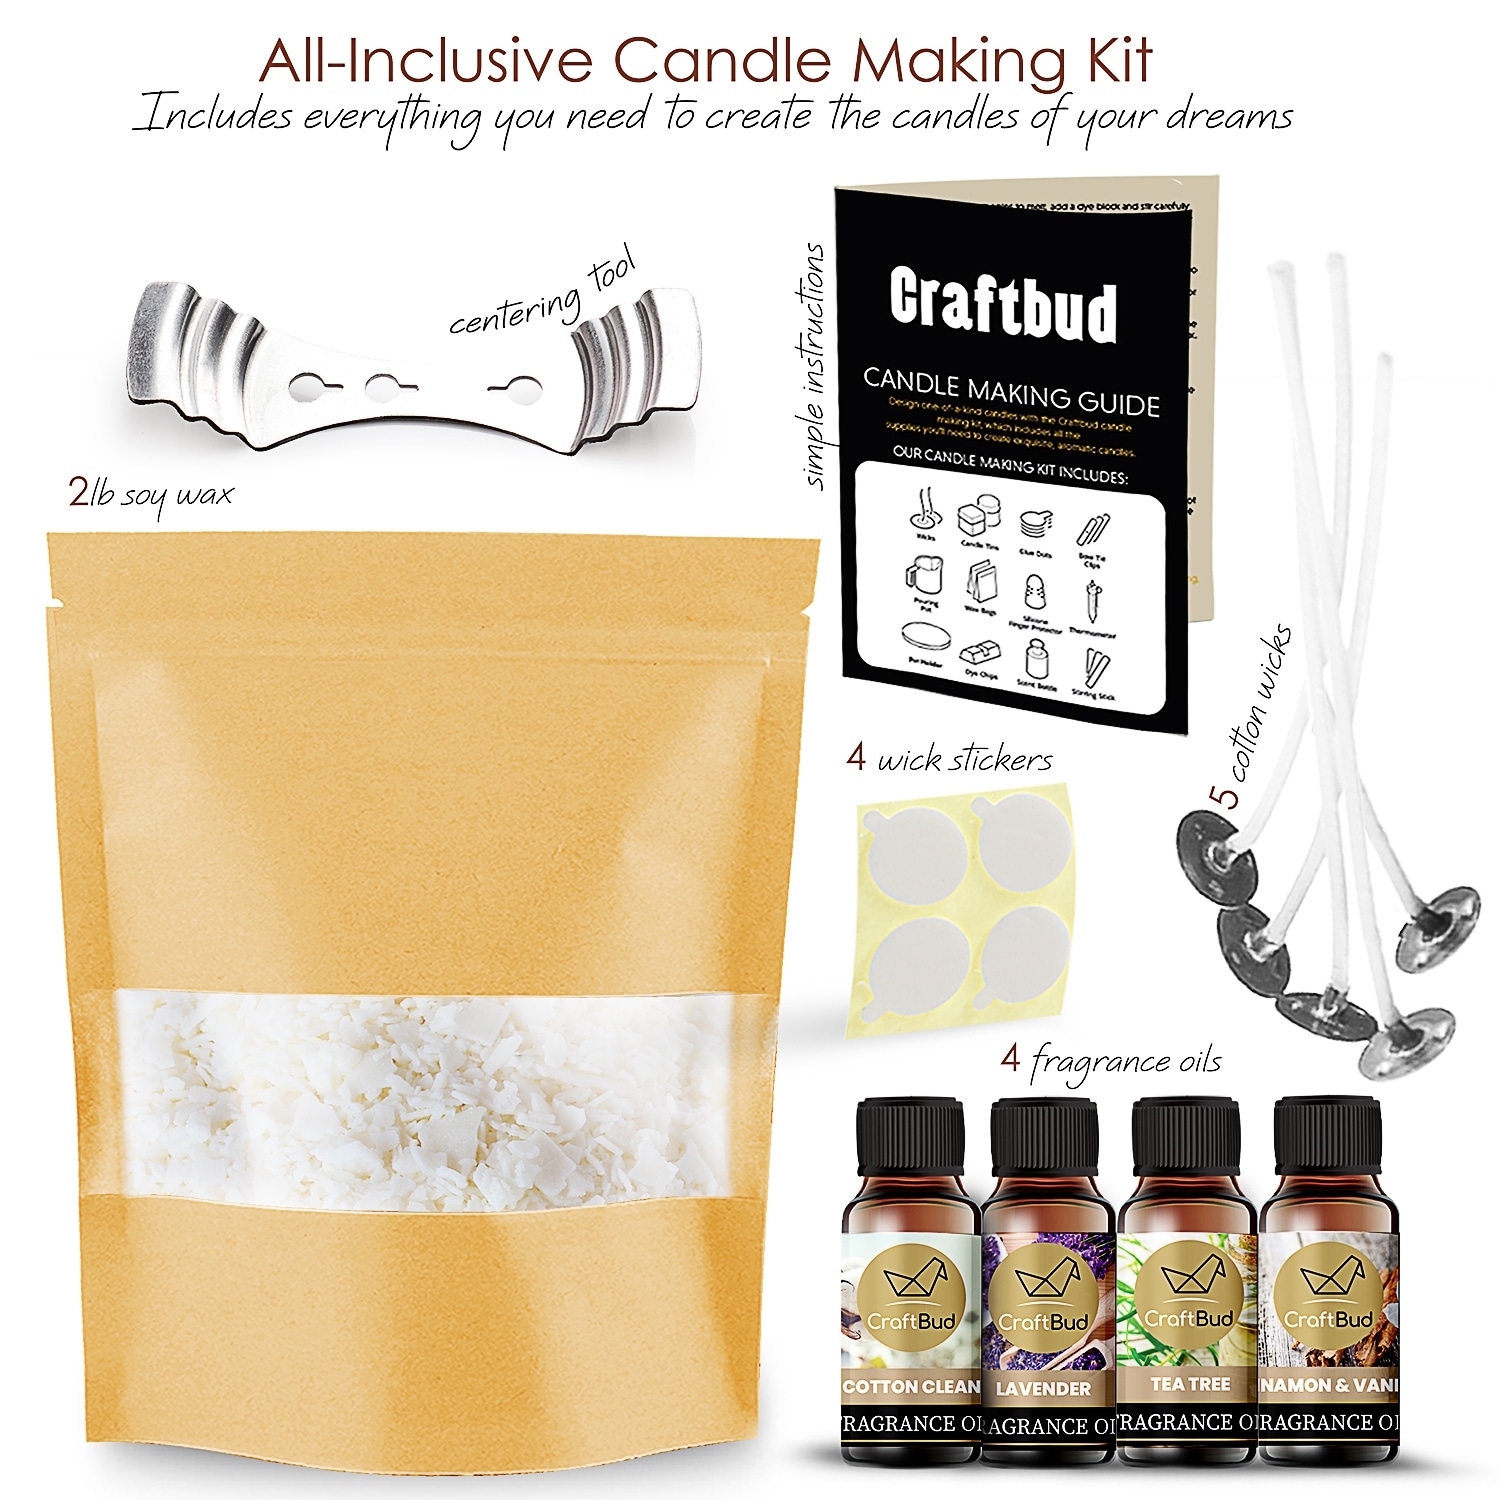 Craftbud 108 Piece Candle Making Kit for Adults & Kids - Full DIY